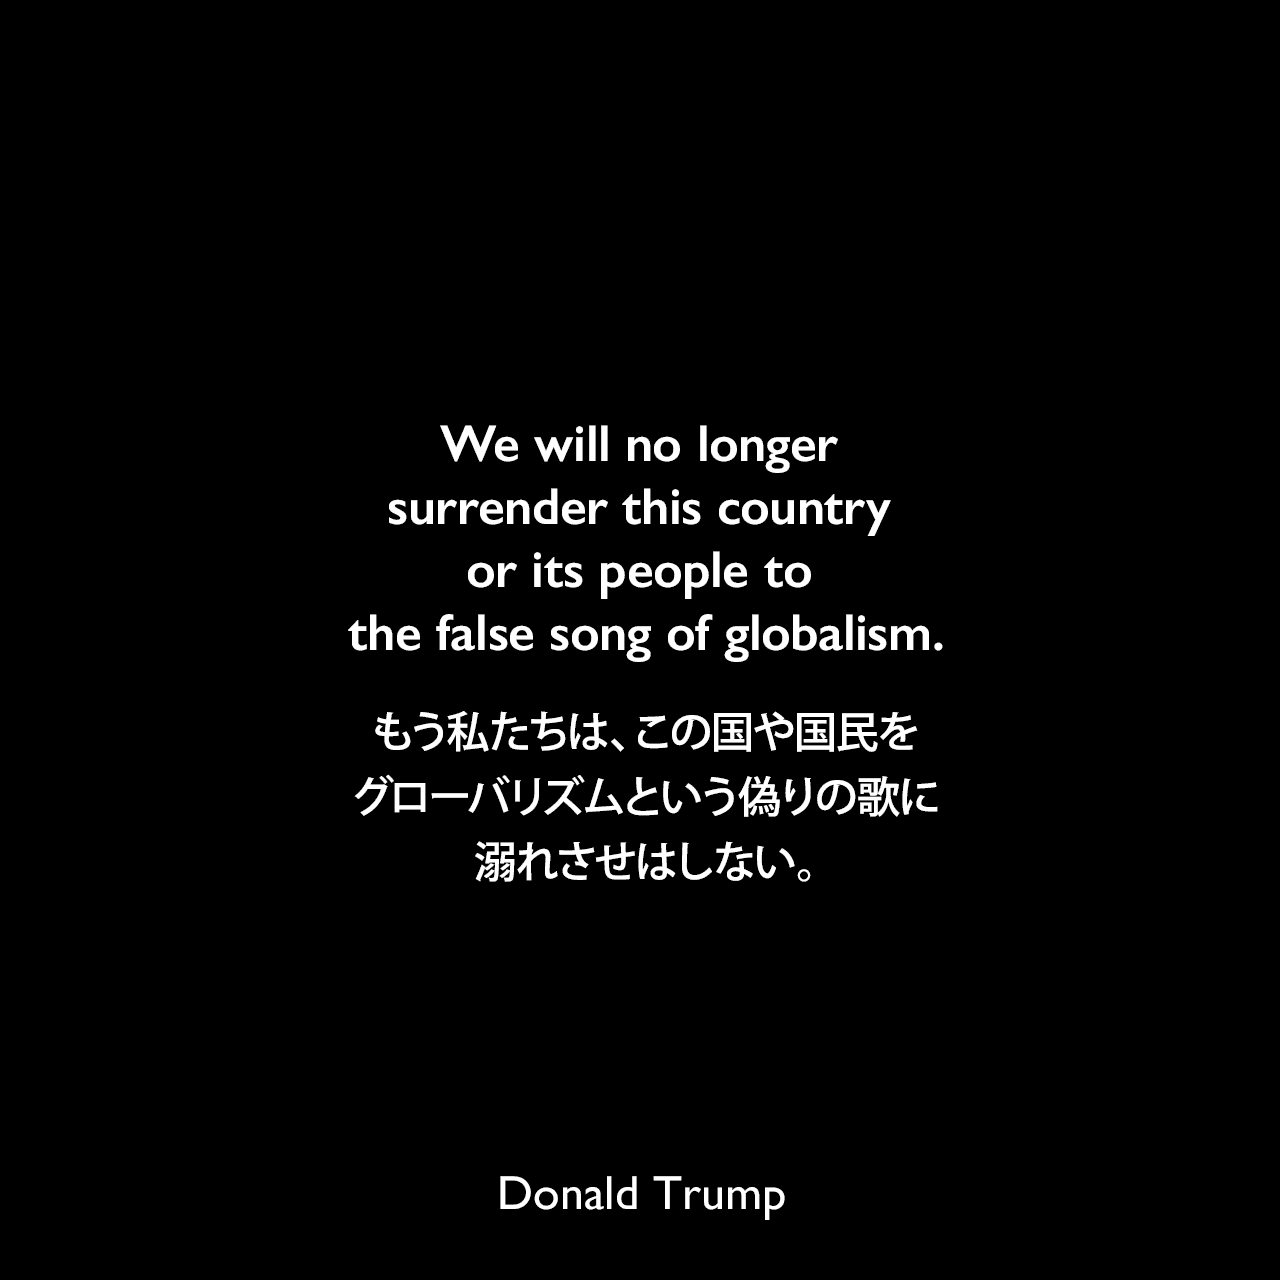 We will no longer surrender this country or its people to the false song of globalism.もう私たちは、この国や国民をグローバリズムという偽りの歌に溺れさせはしない。- 2016年の外交政策のスピーチよりDonald Trump